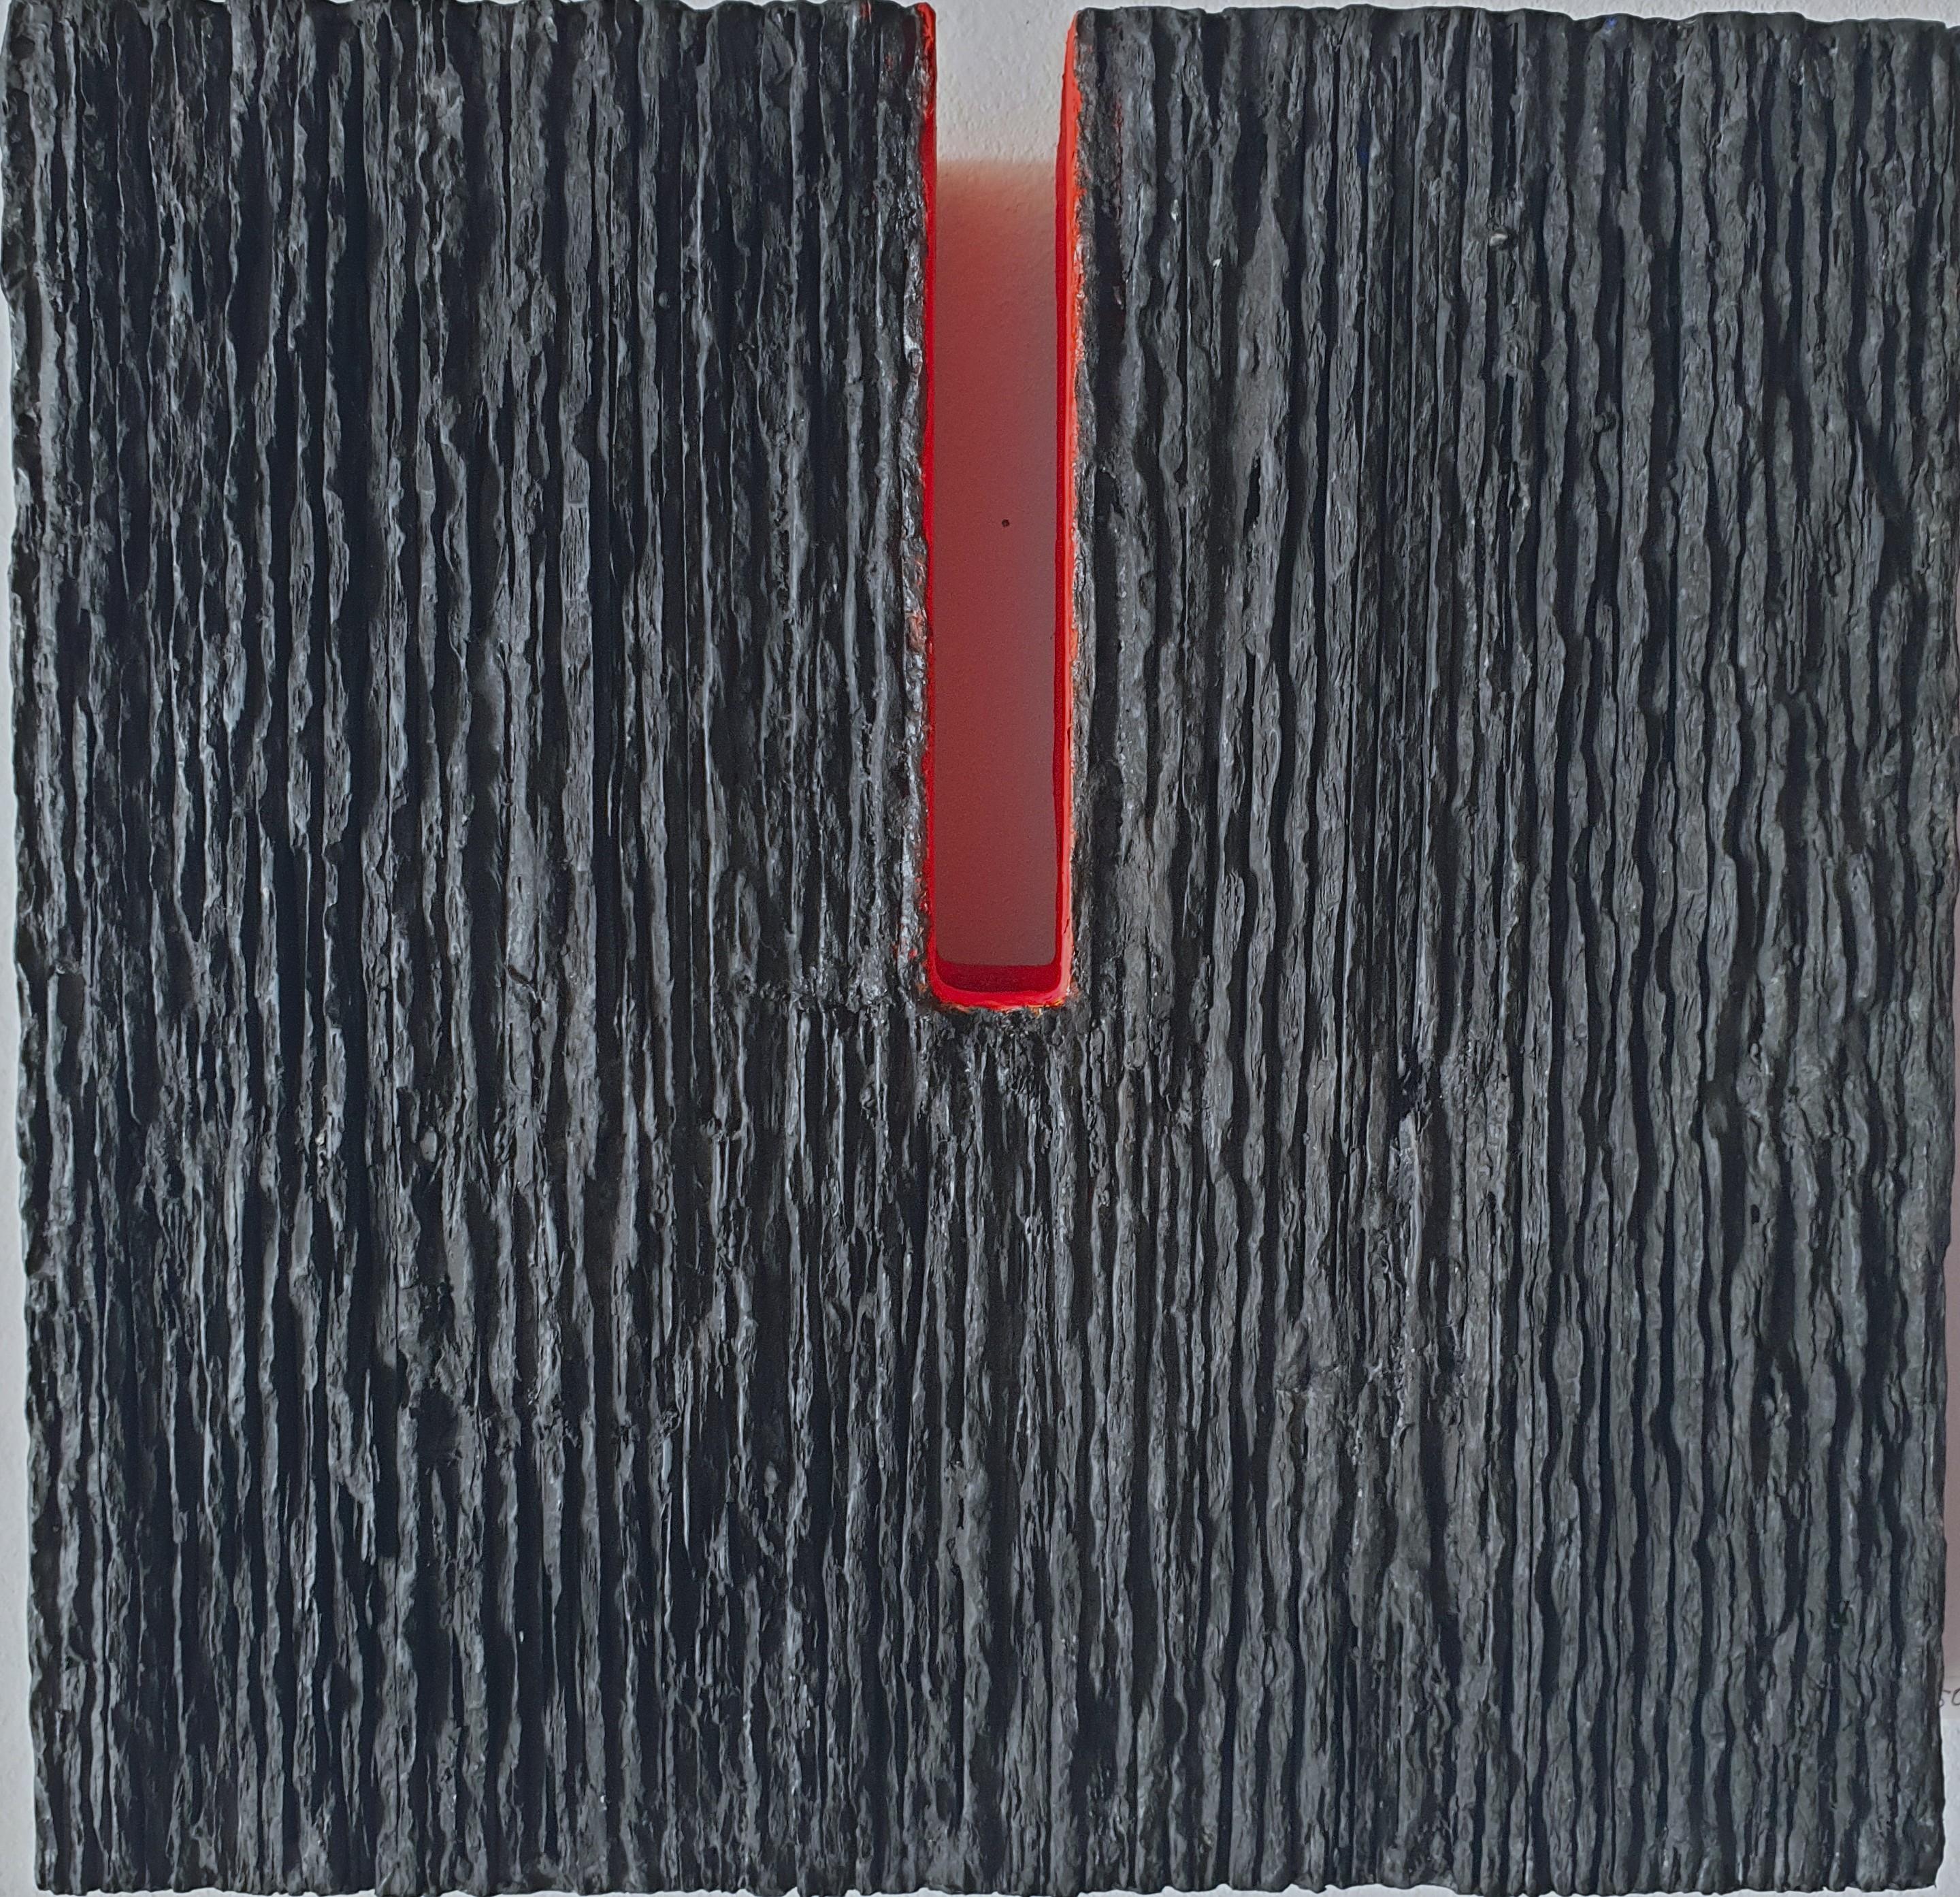 Michiel Jansen Abstract Sculpture - Center - black red contemporary modern abstract sculpture painting relief